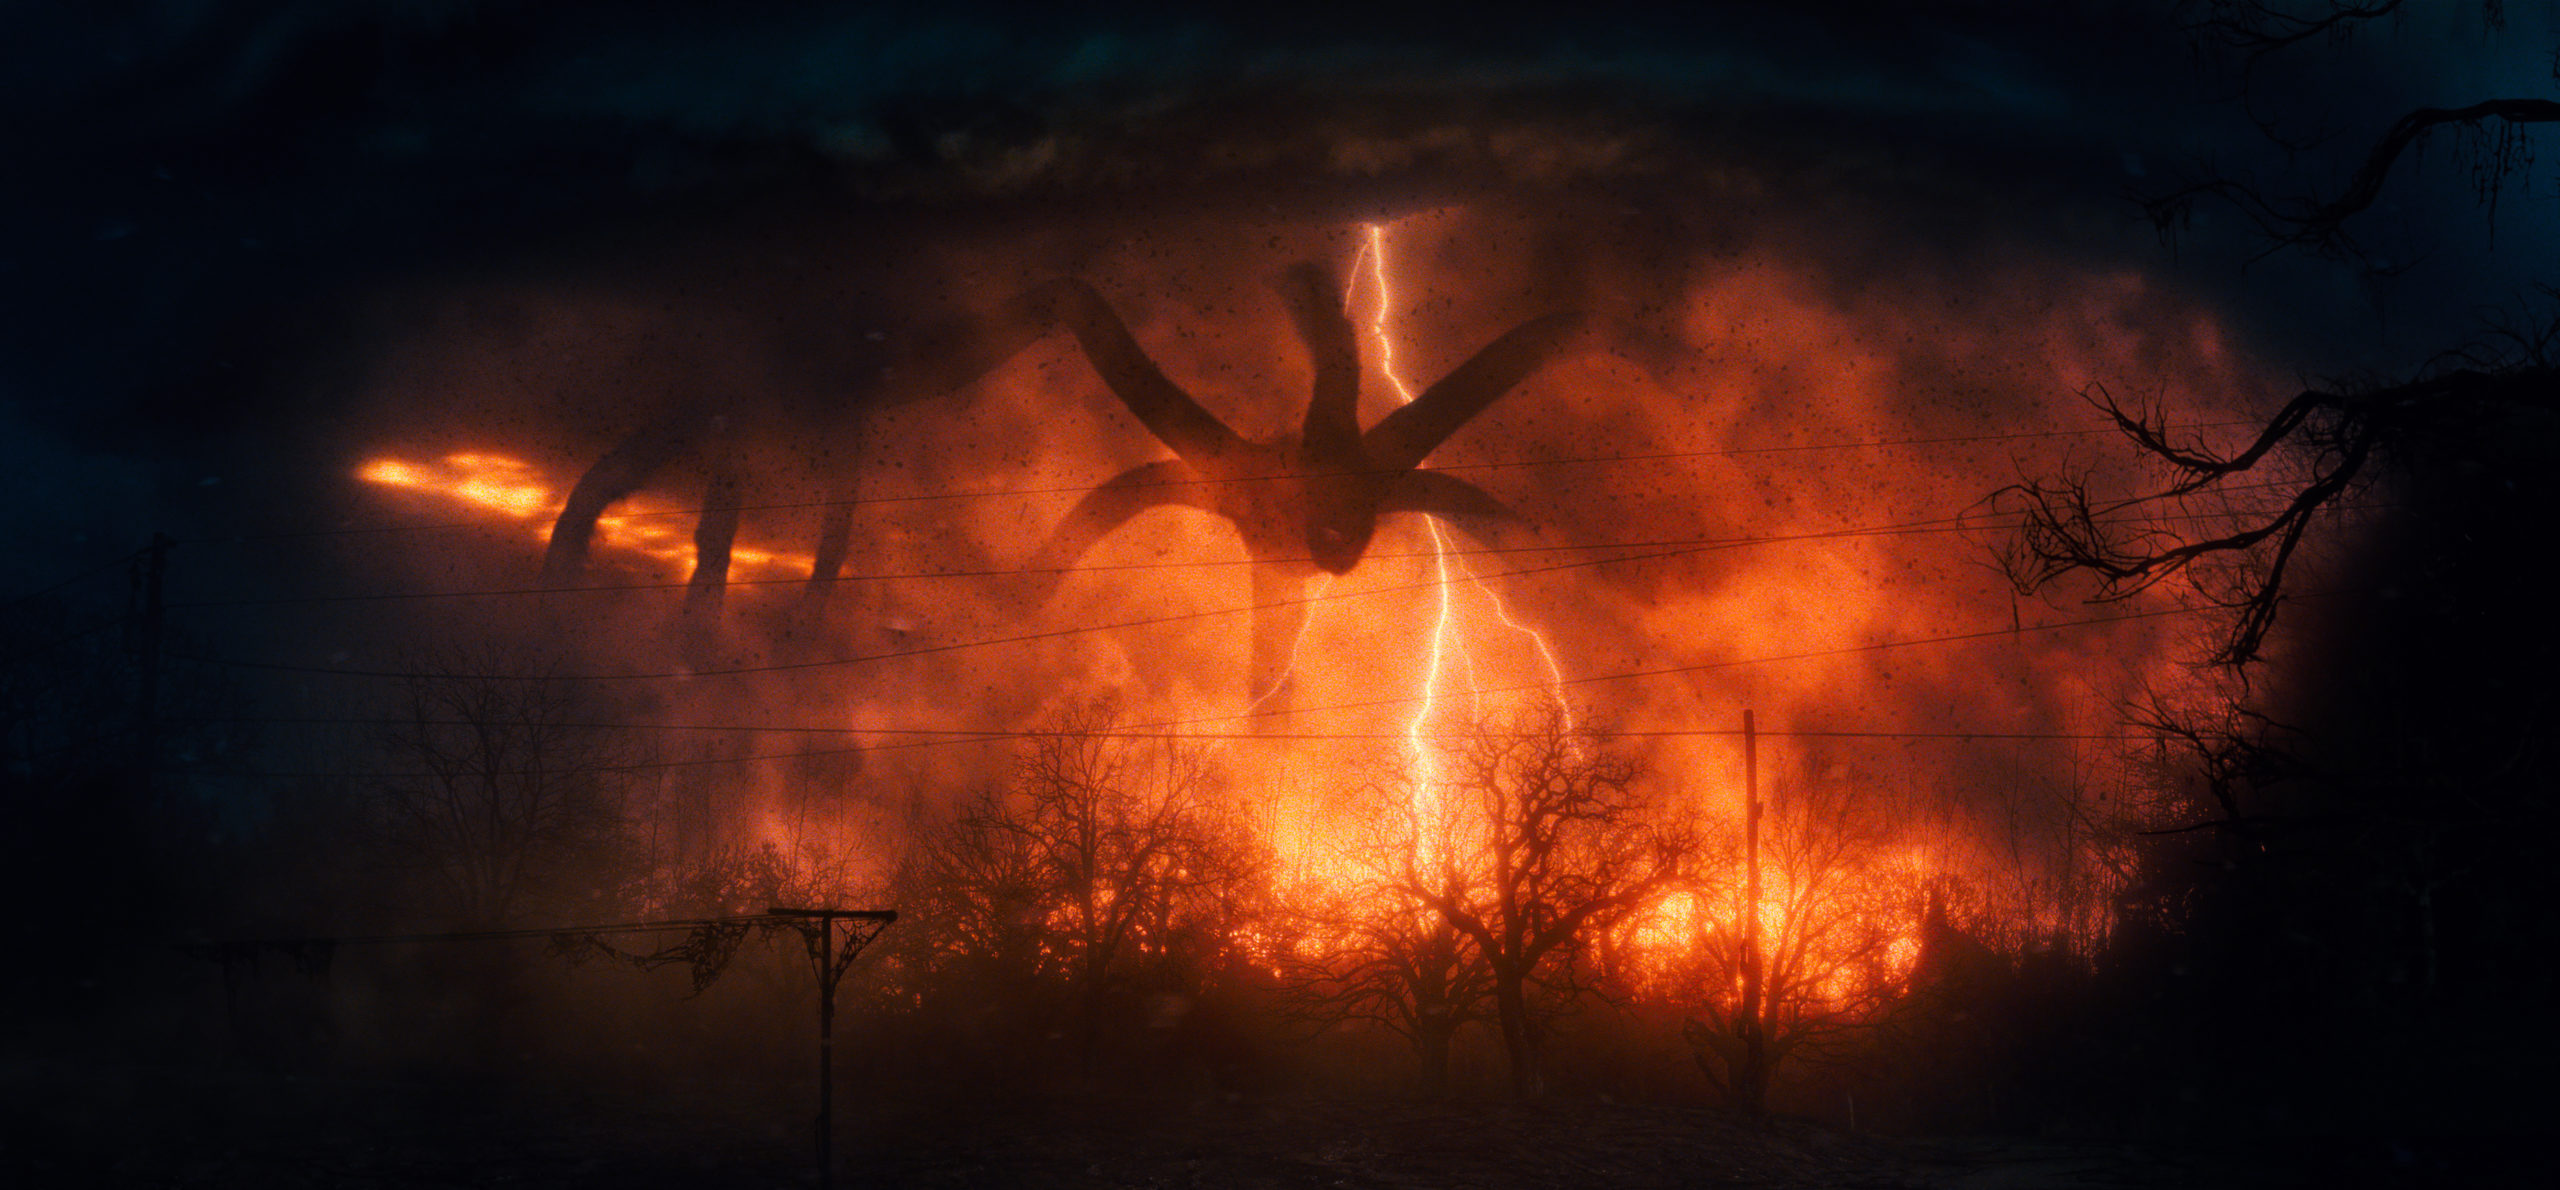 The Original Pitch For Stranger Things May Hold Clues About The Show’s Future